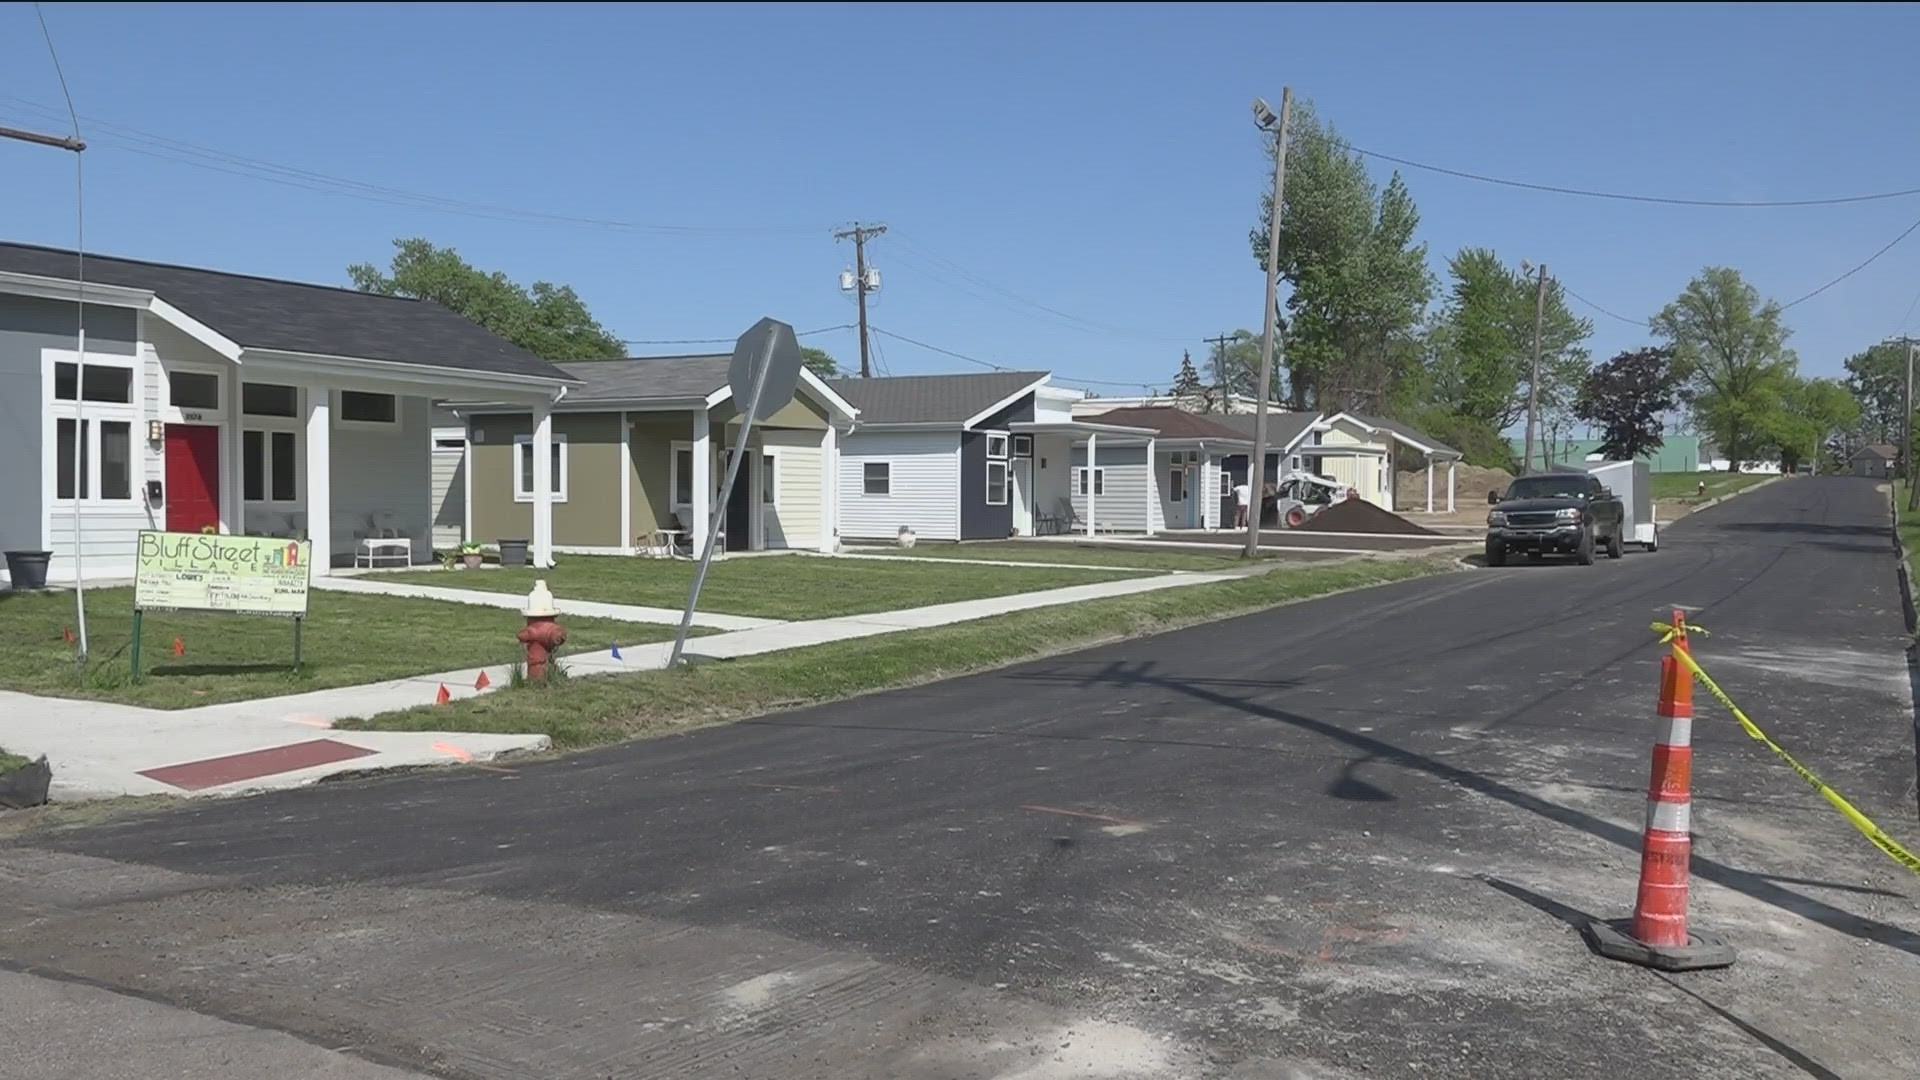 Monroe Street United Methodist Church Pastor Larry Clark said the Bluff Street Village homes give people an opportunity to become first-time homeowners.